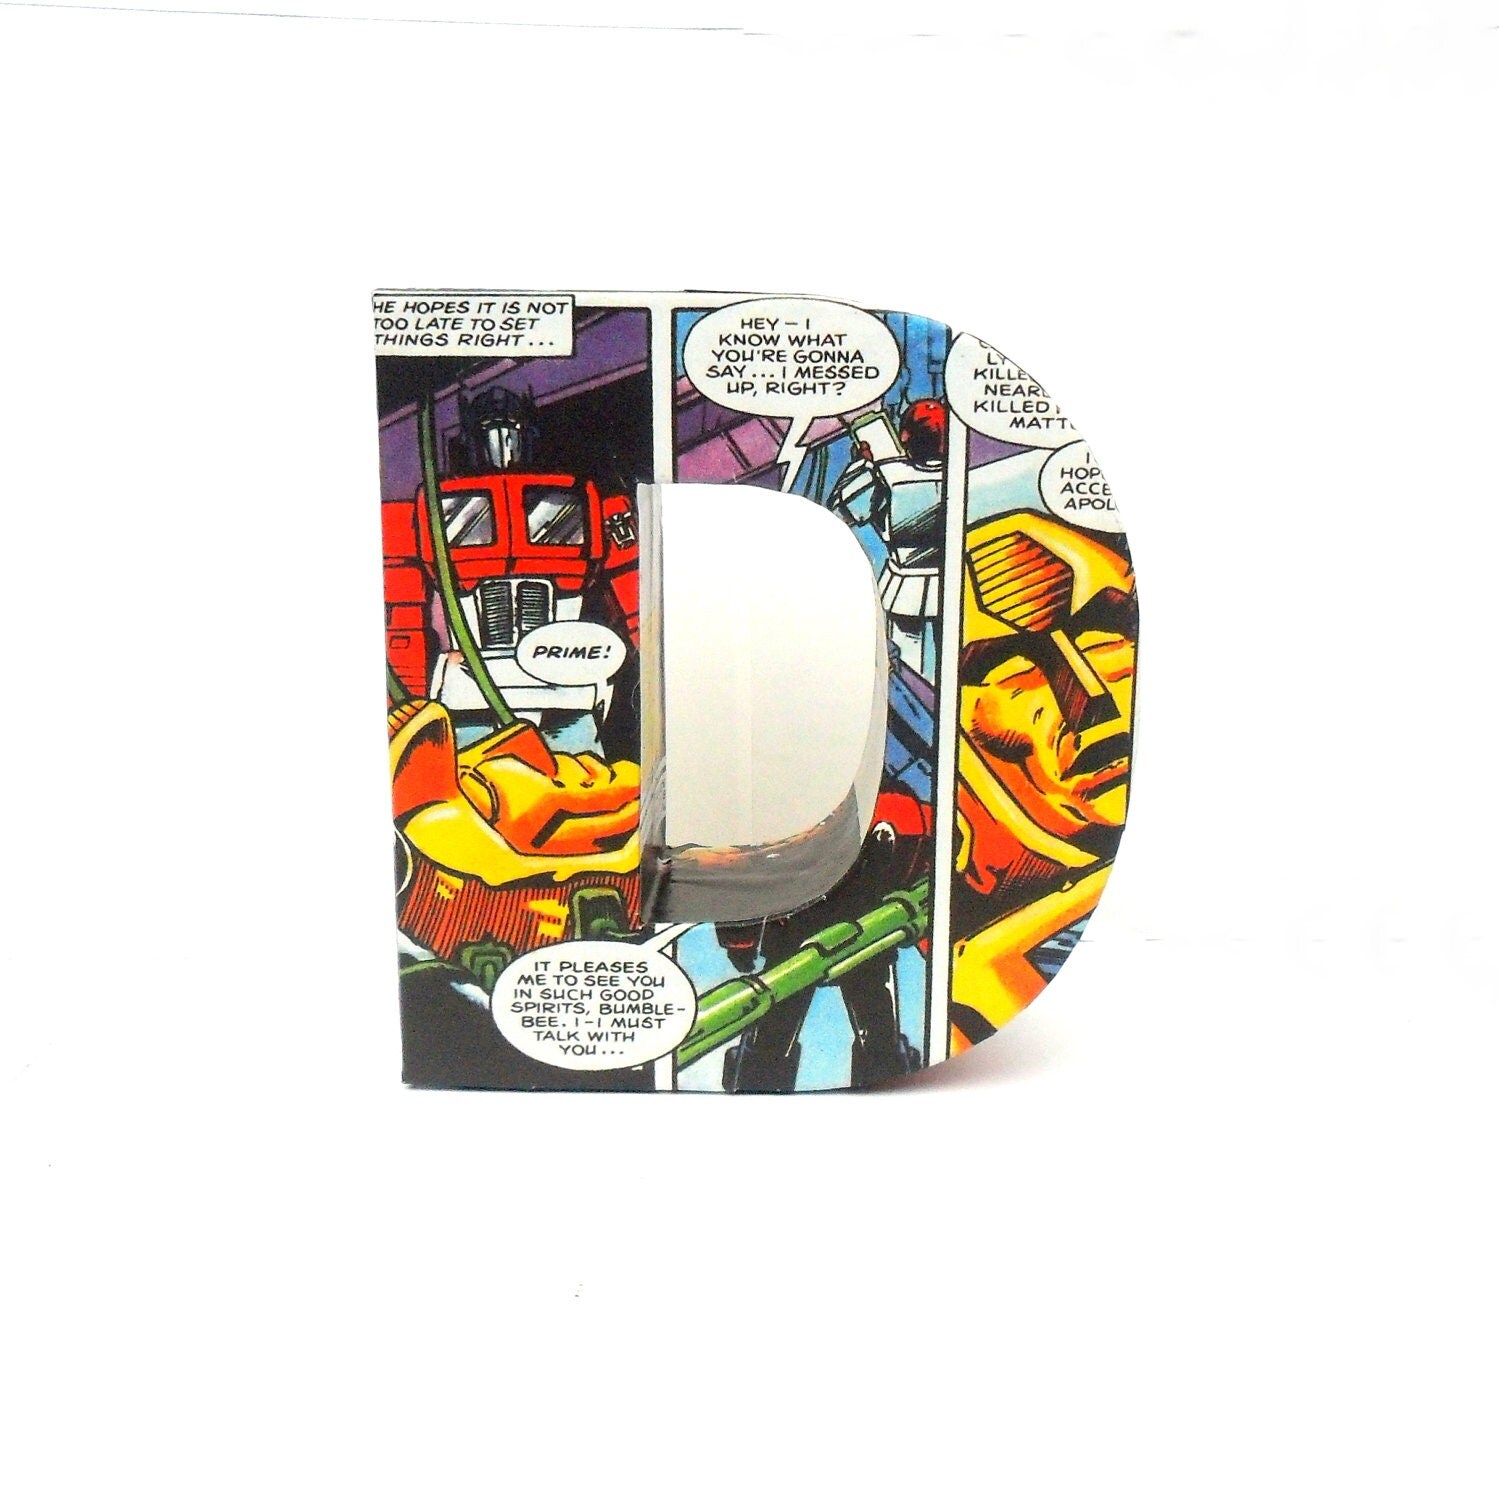 comic book letters